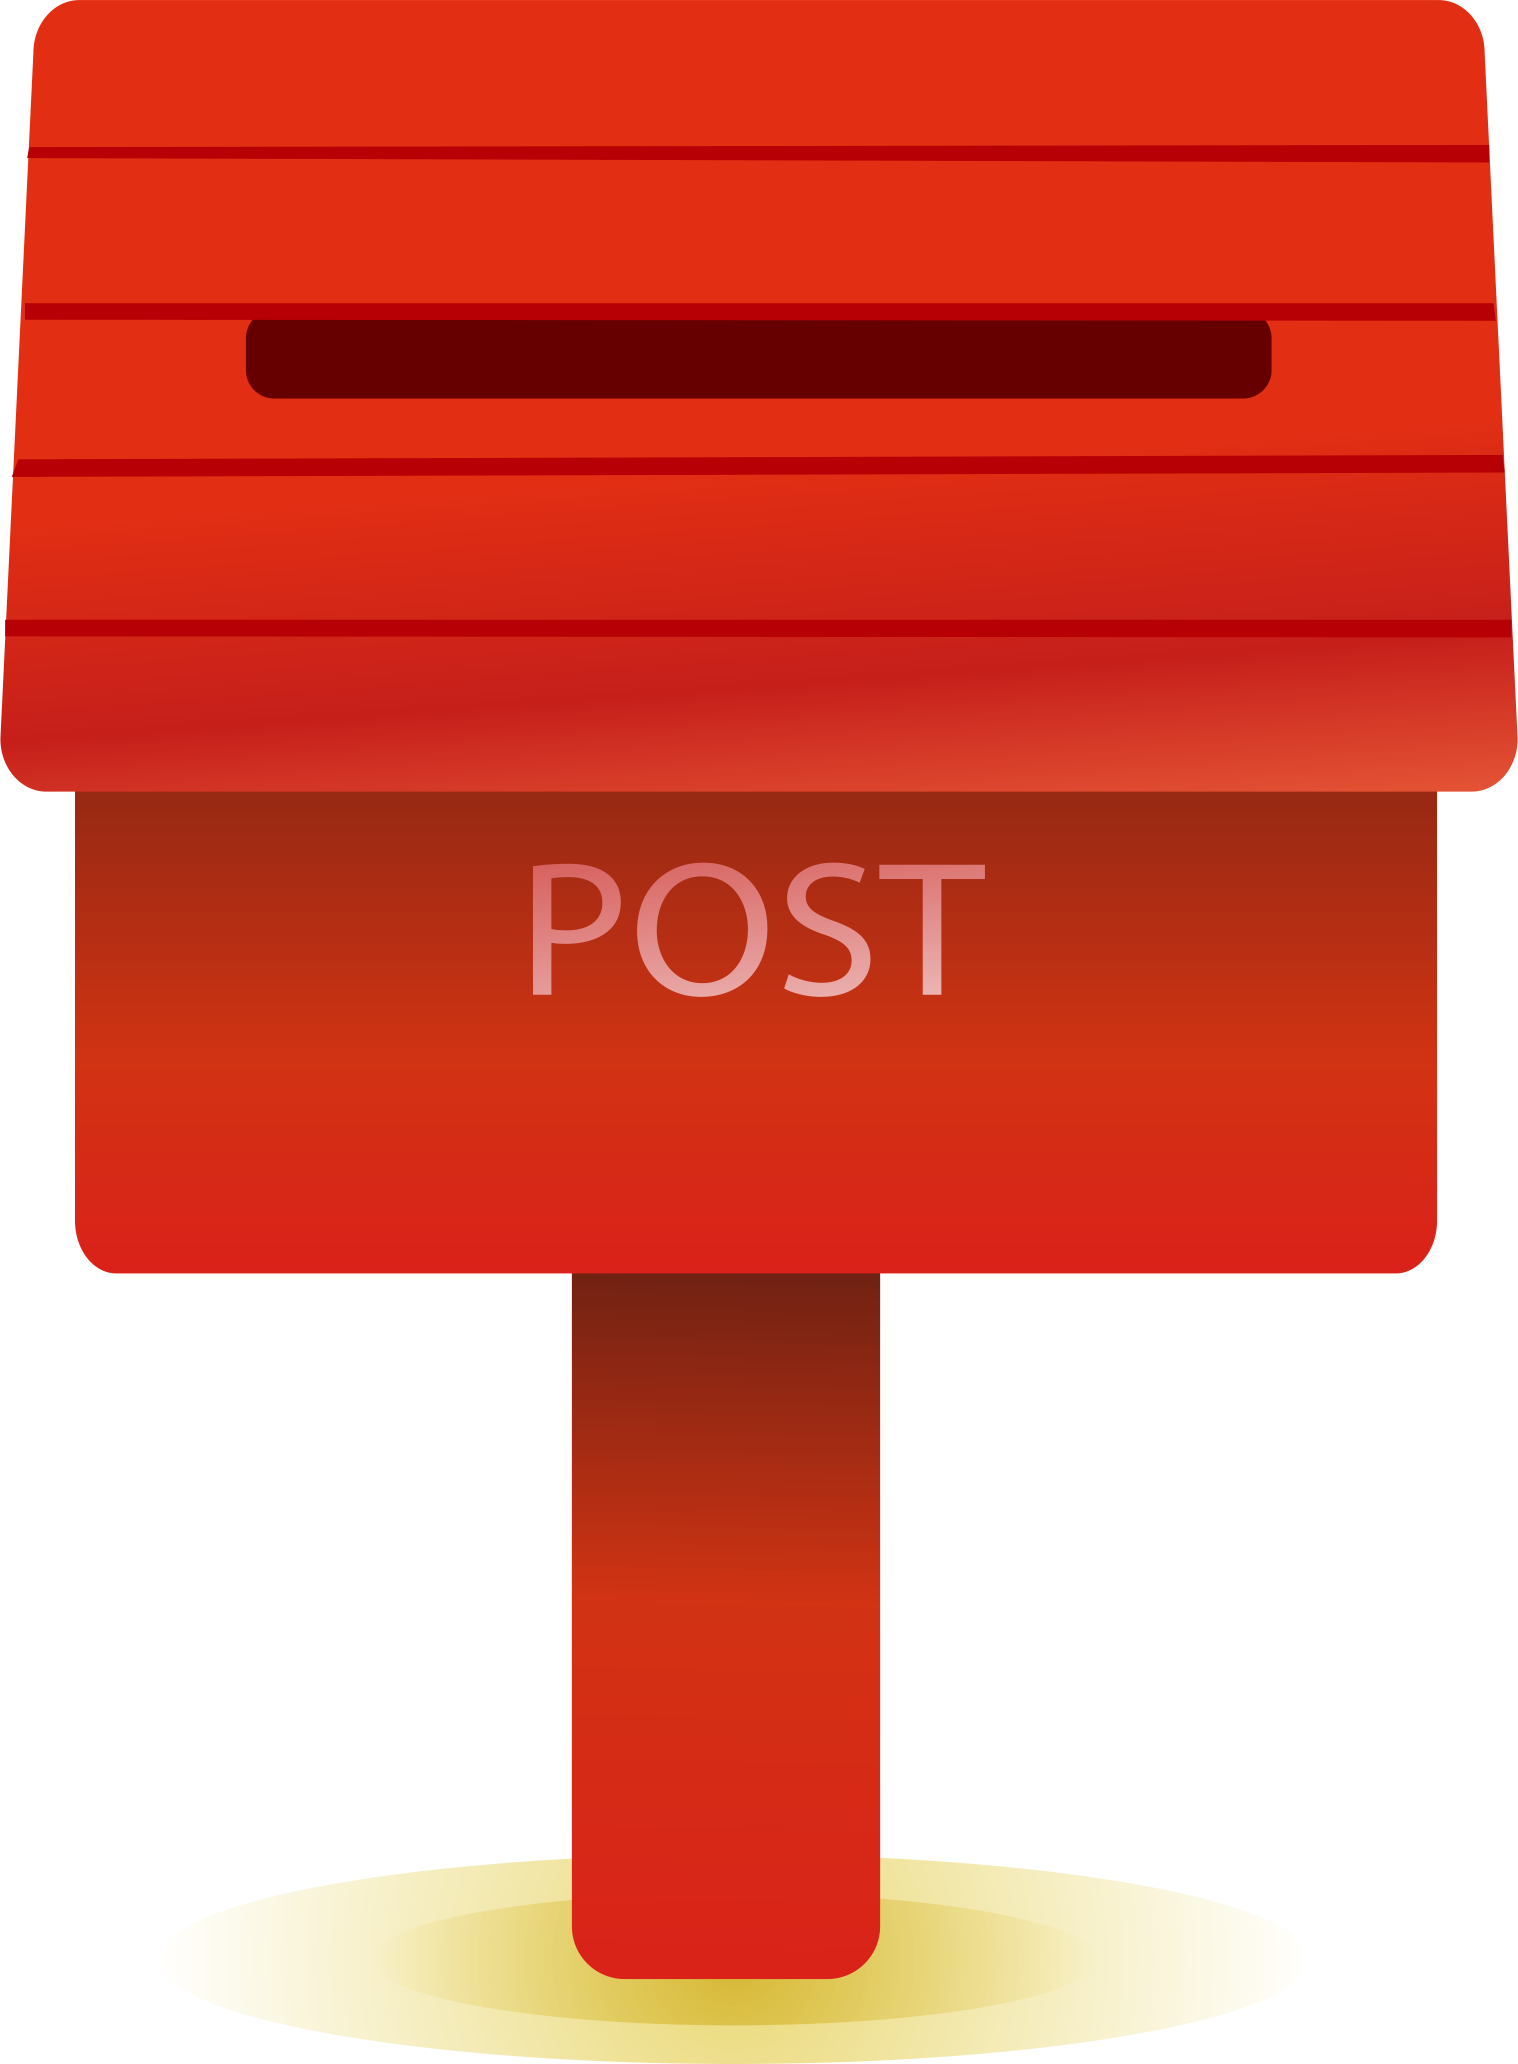 Post Box PNG Image Background